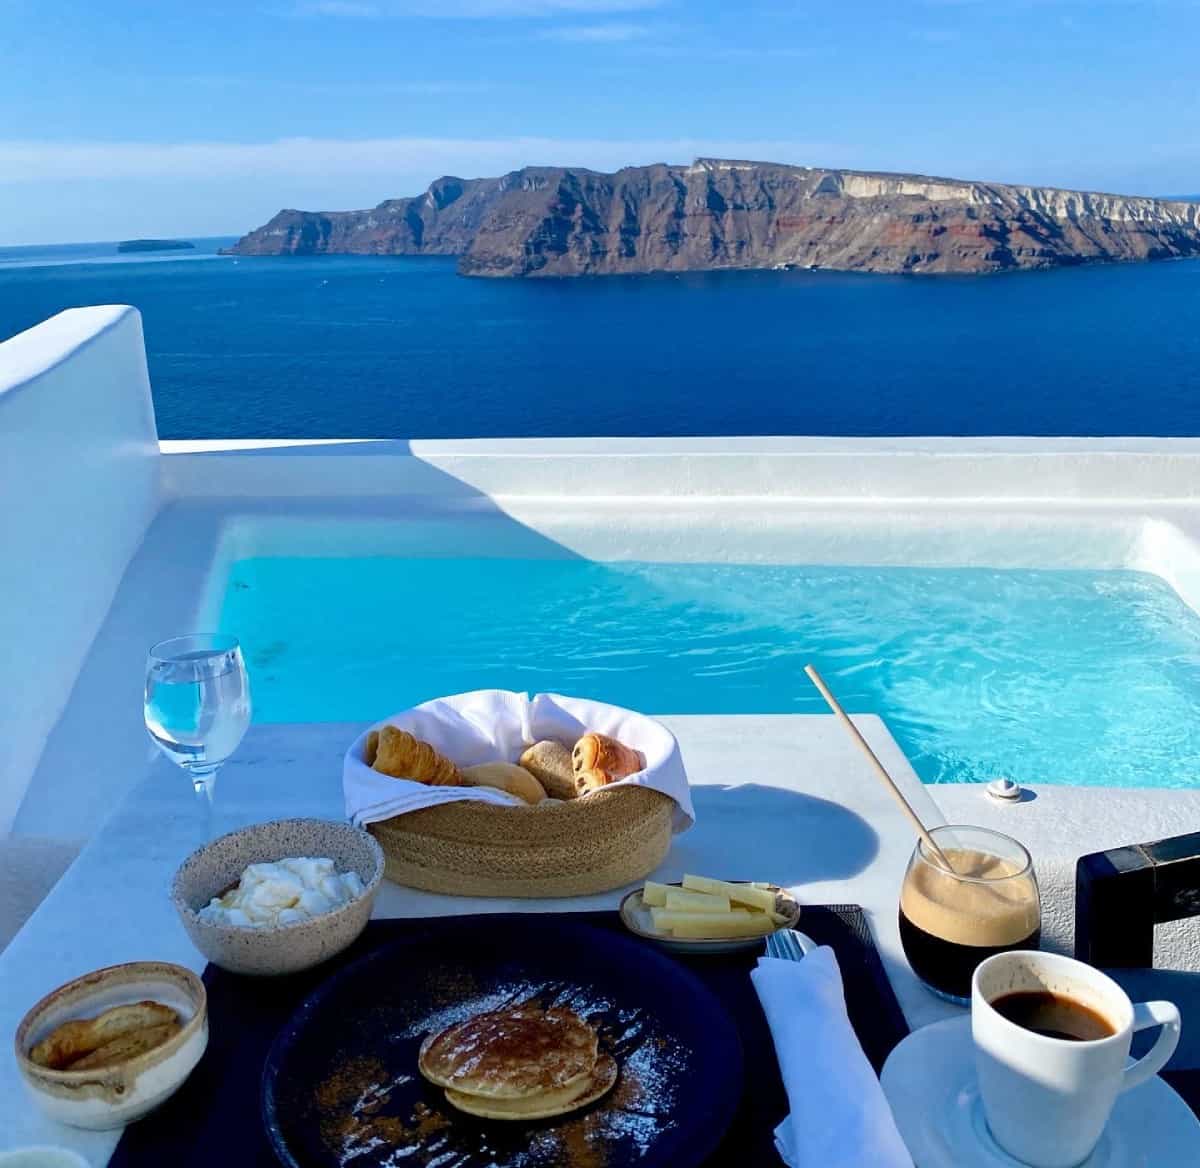 Things to do in Oia, Santorini (& is Oia worth visiting?) - if you're going to stay in Oia (vs. just visiting), I strongly recommend splurging on an amazing hotel